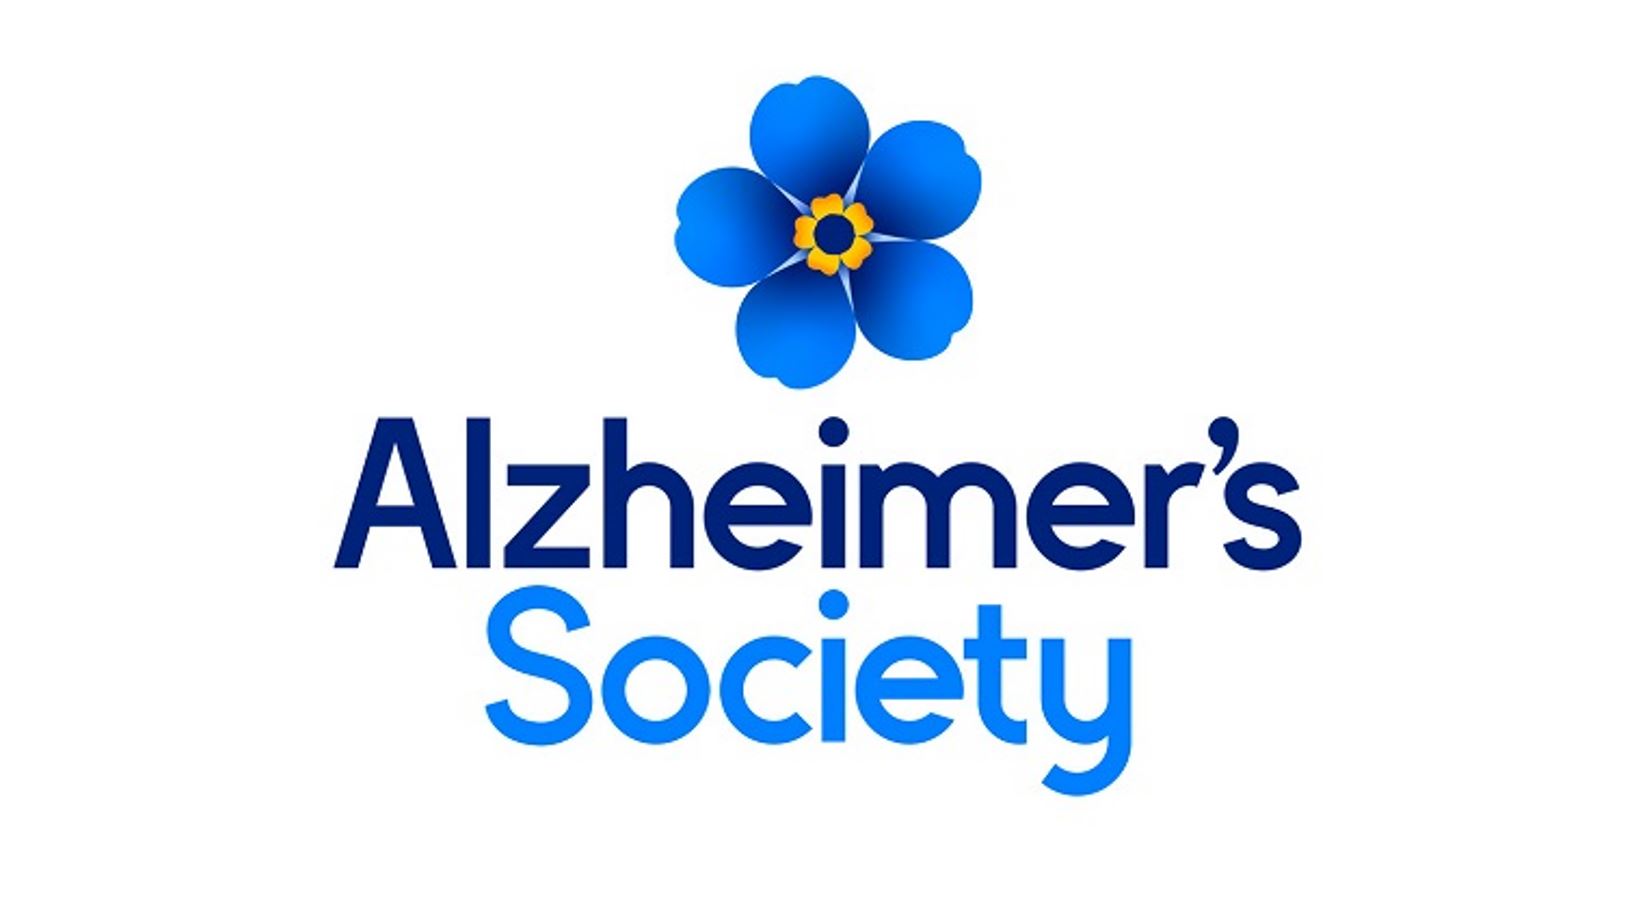 Air Sourcing makes charity donation to Alzheimer’s Society to mark World Alzheimer’s Day after reaching 1 million milestone in Summer KFI Campaign